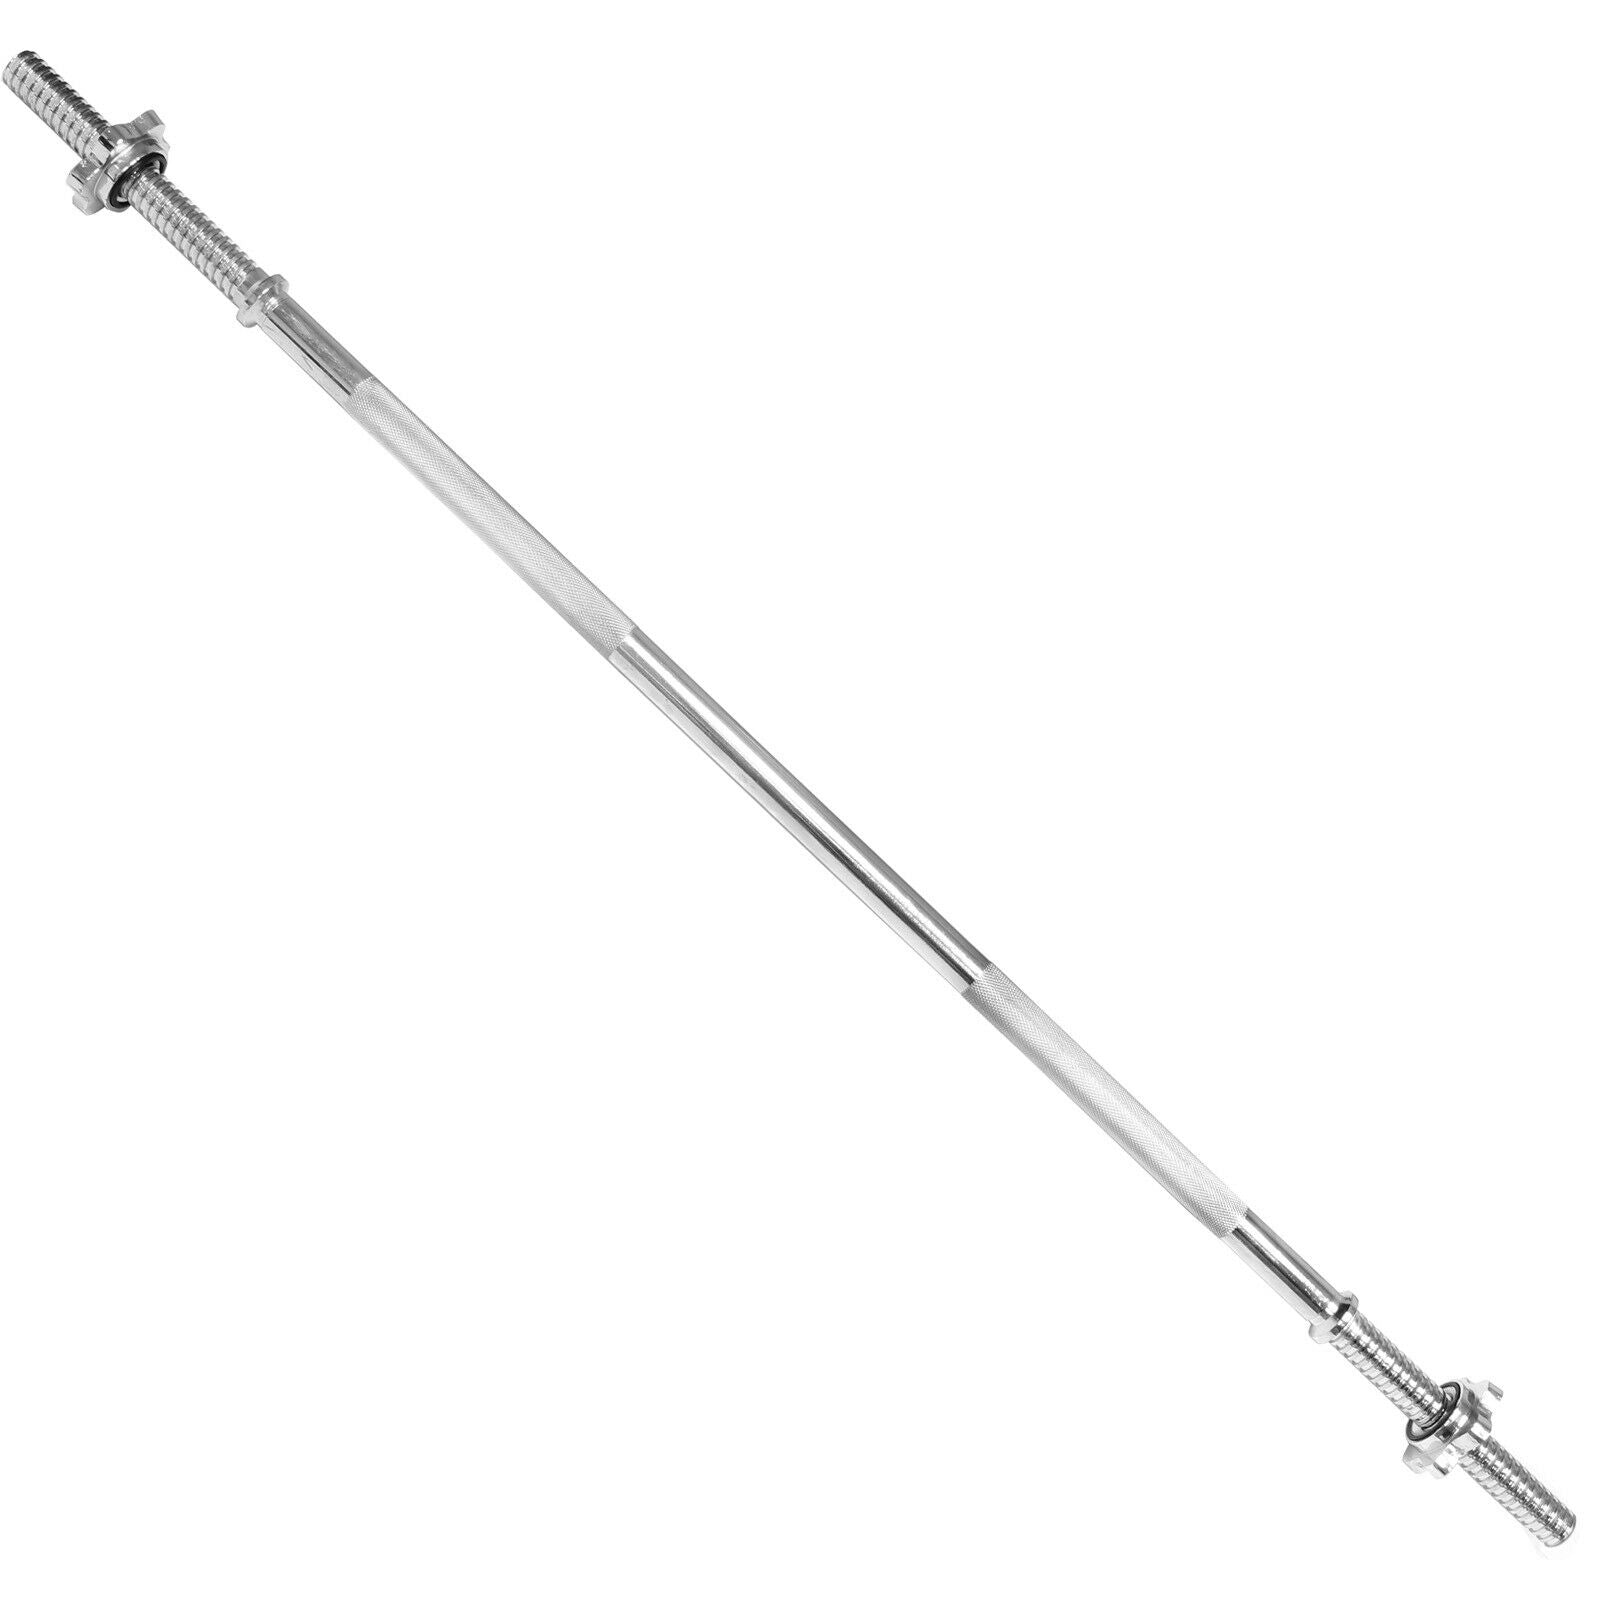 Fitness 4ft Spinlock Barbell Bar Weight Lifting Strength/Fitness Training